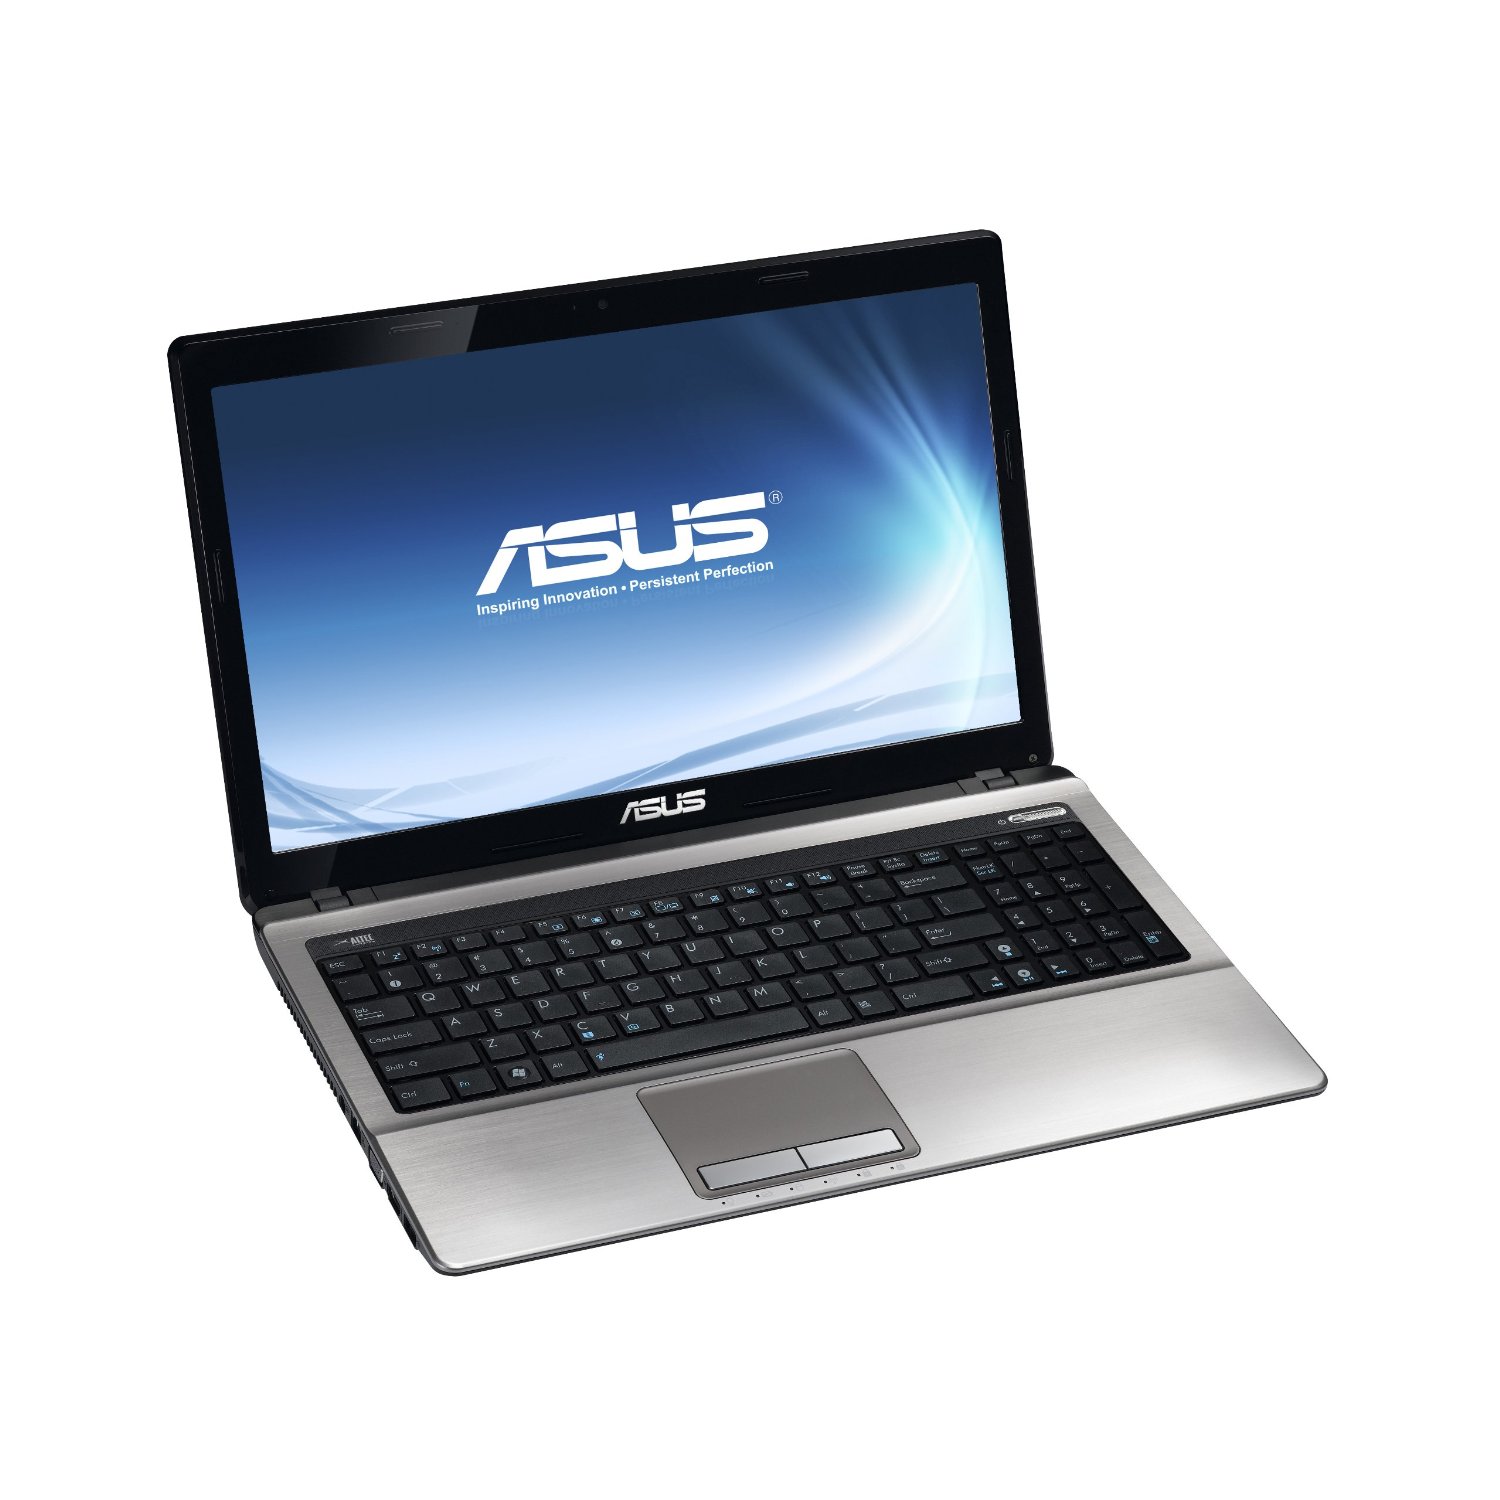 http://thetechjournal.com/wp-content/uploads/images/1204/1335535237-asus-brings-new-a53ees31-156inch-laptop-6.jpg